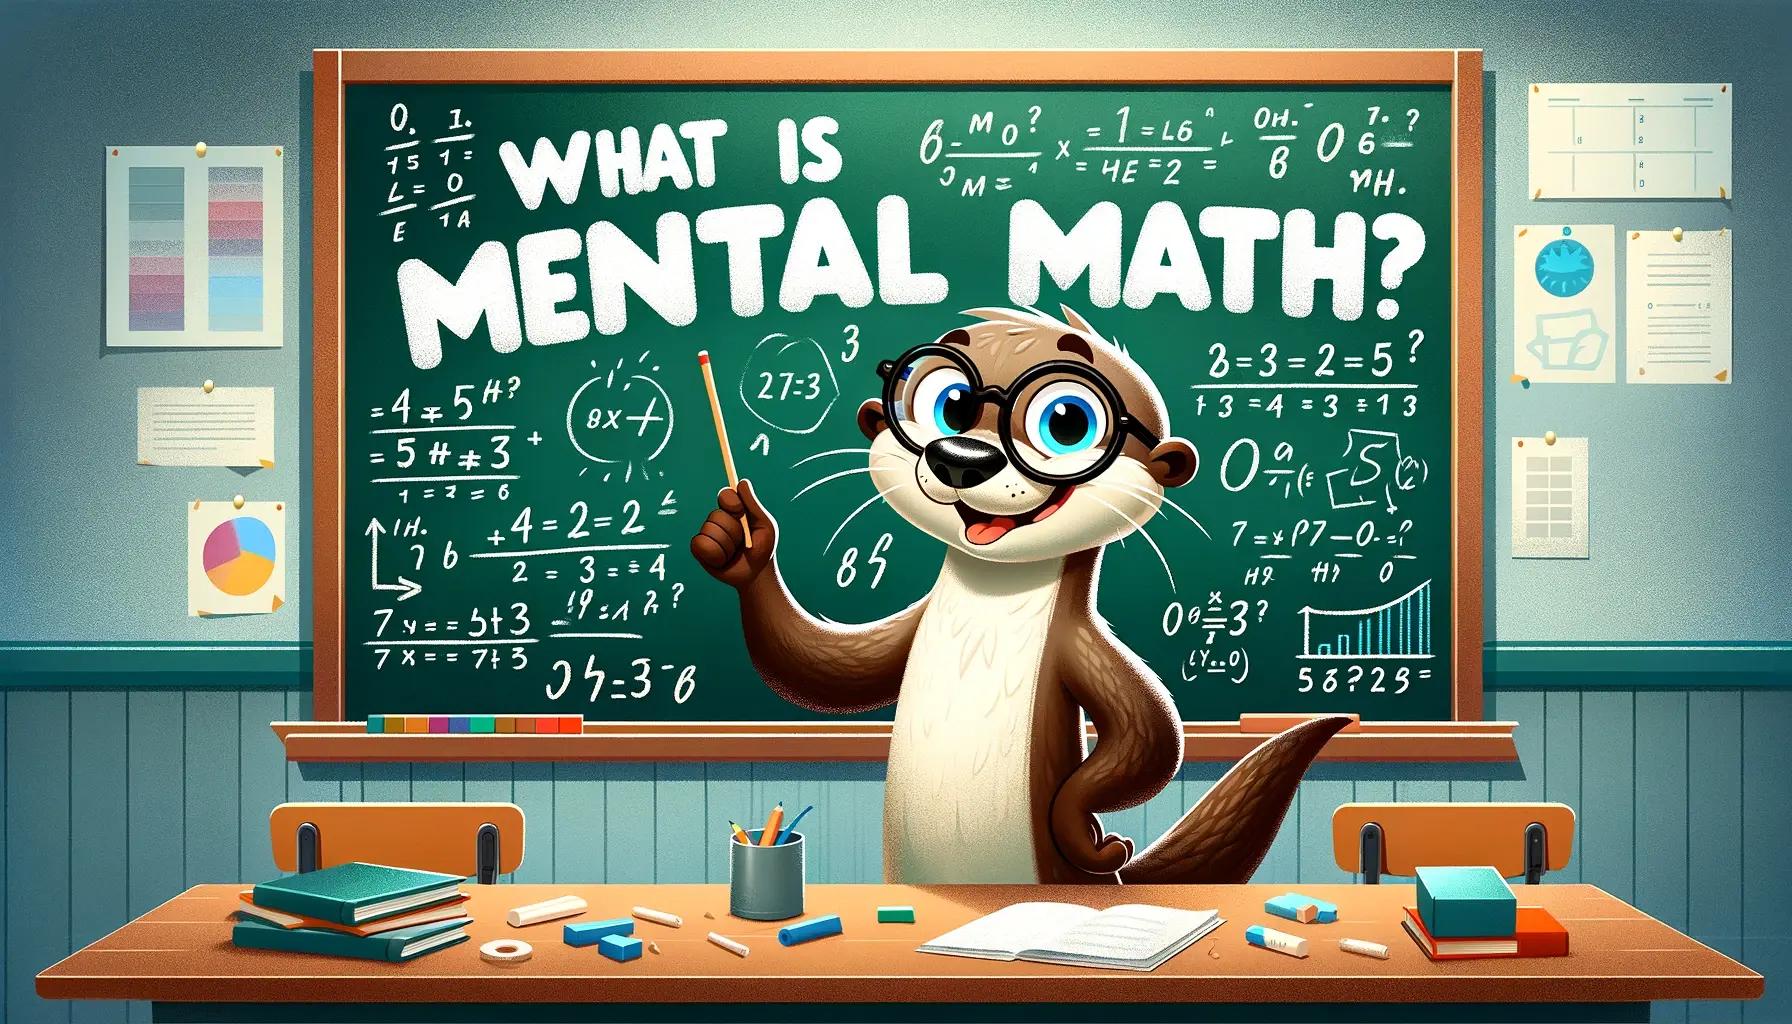 What is Mental Math?